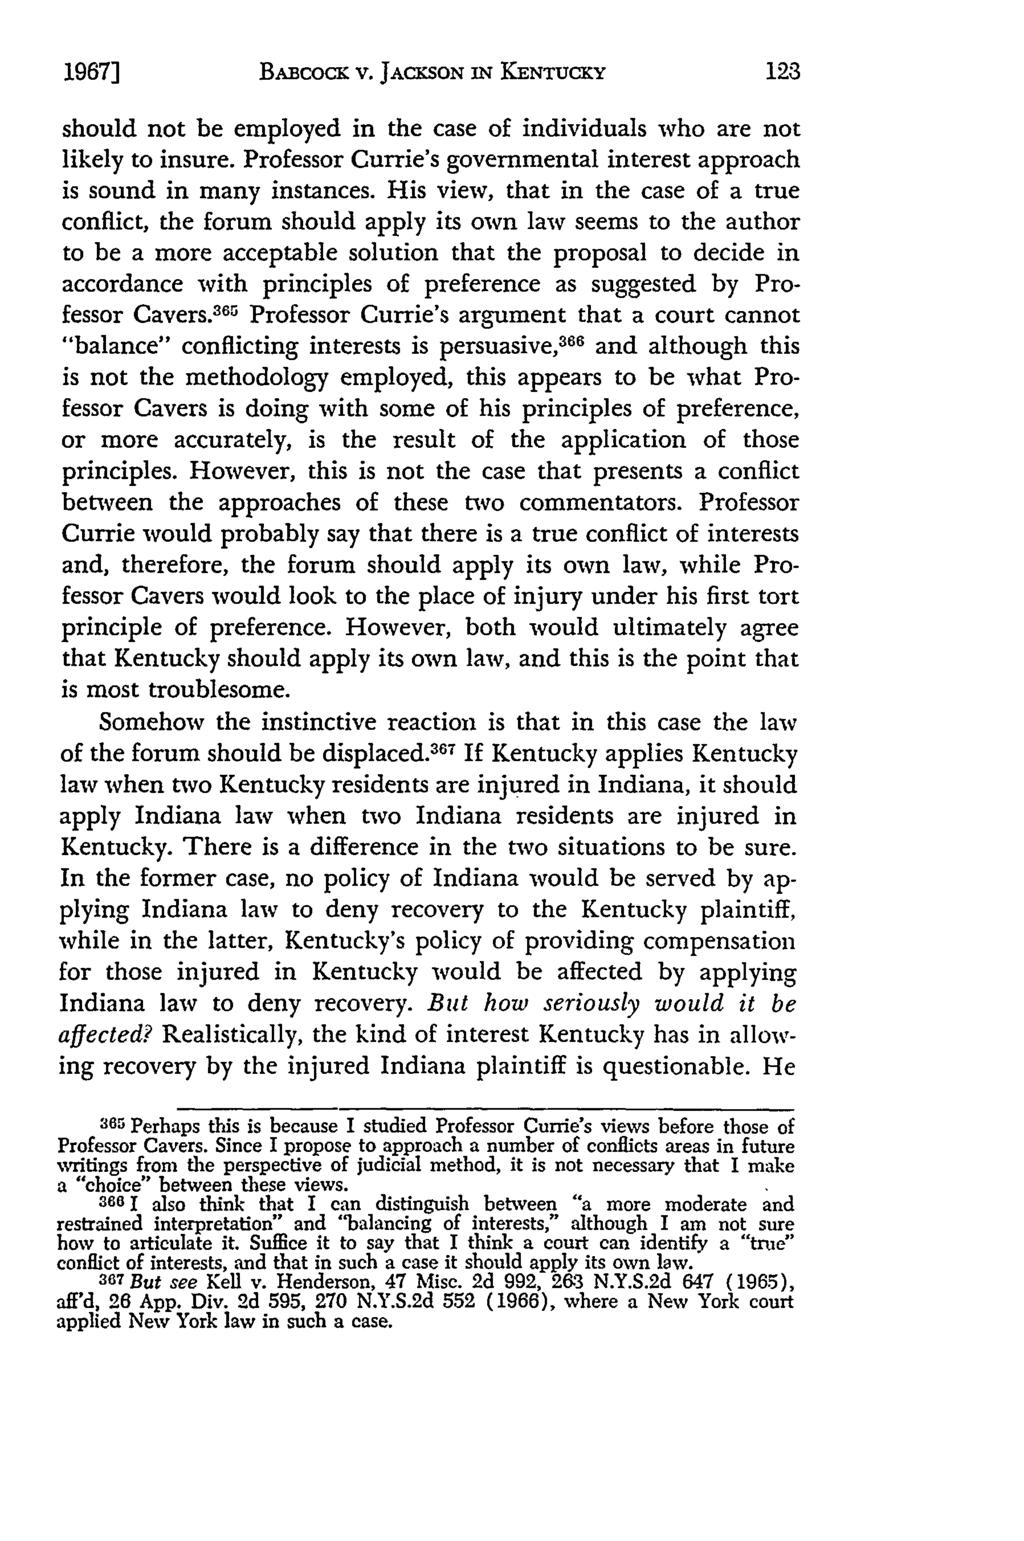 1967] BABcocK v. JACKSON IN KENTUCKY should not be employed in the case of individuals who are not likely to insure. Professor Currie's governmental interest approach is sound in many instances.